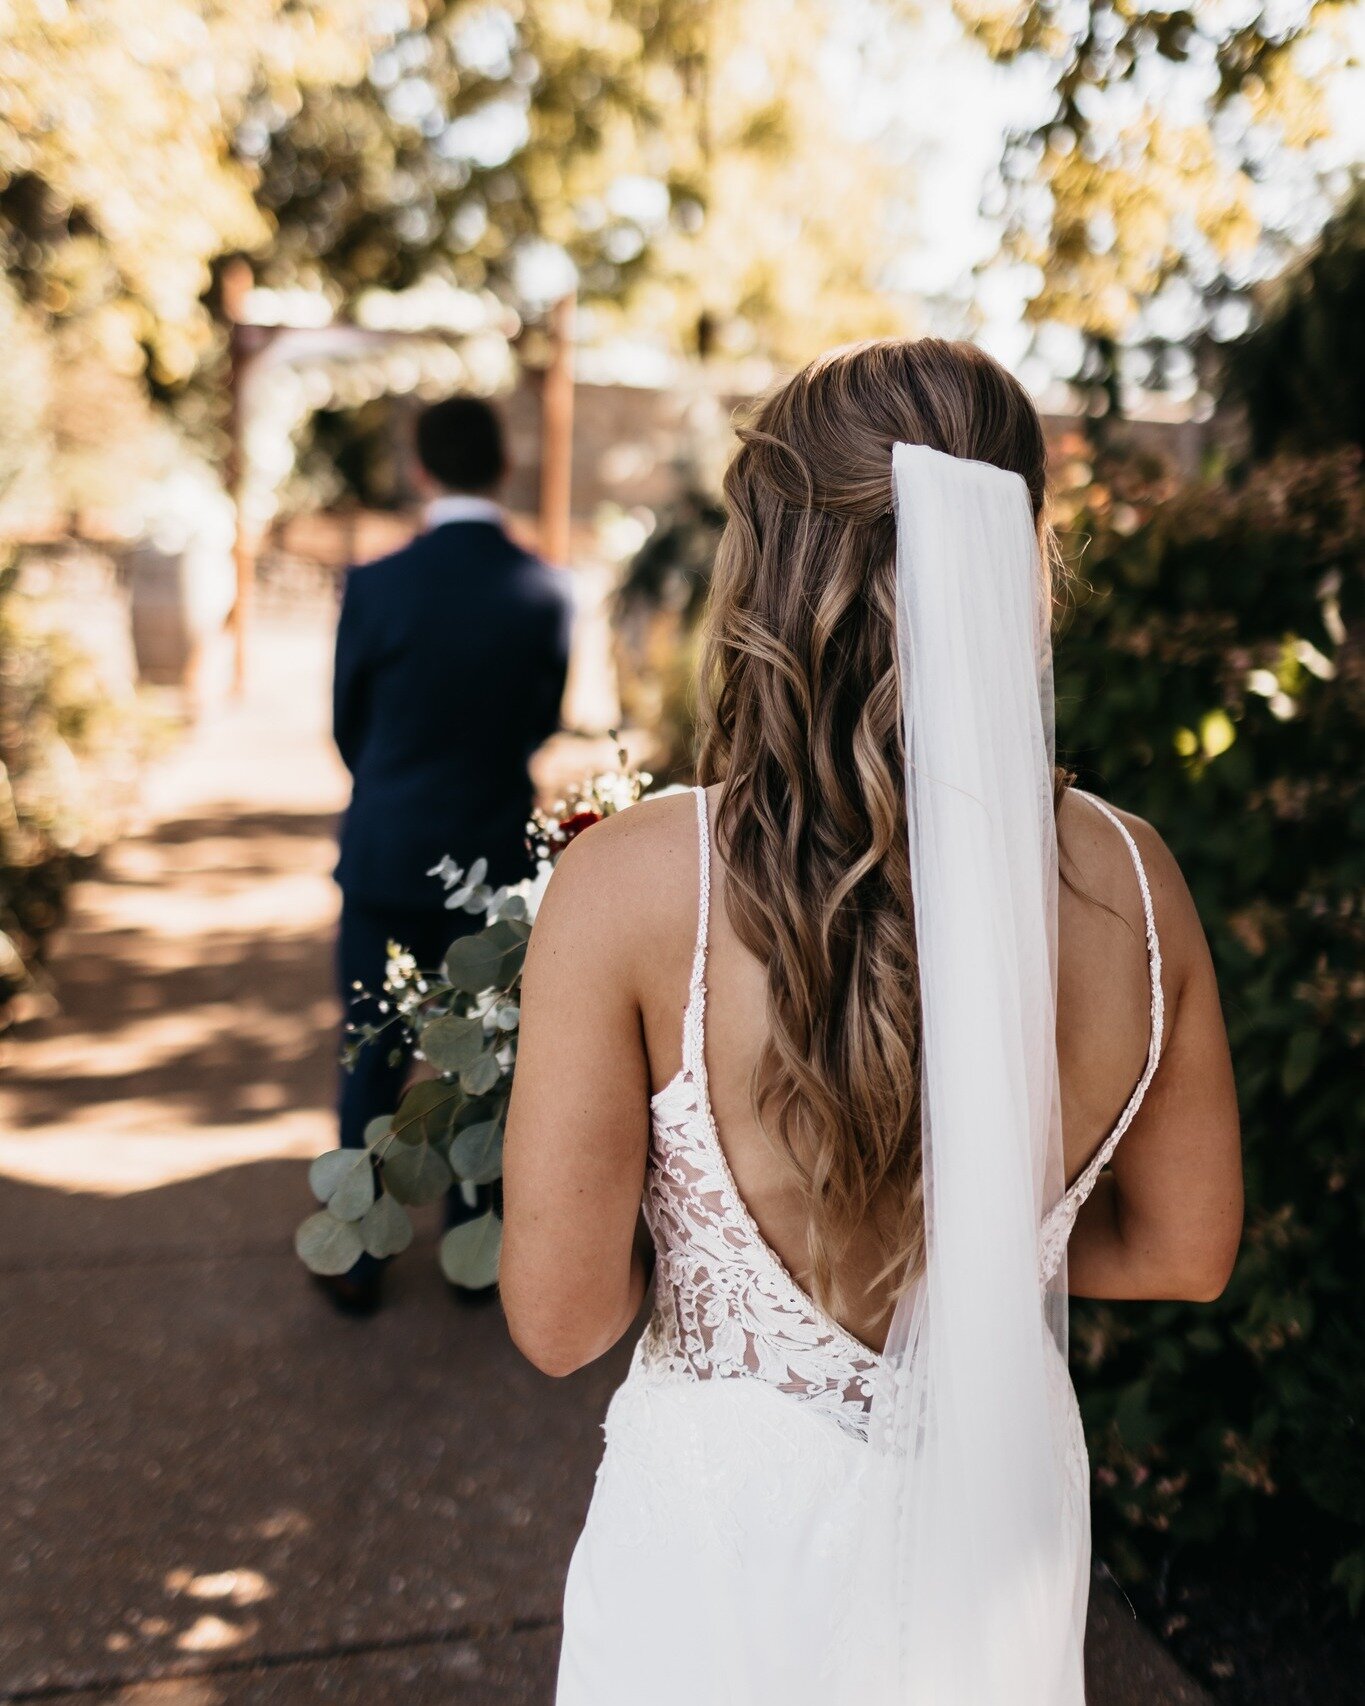 Some of our favorite ✨First Look✨ perks...👇

💍 Helps calm nerves before the ceremony - you'll see each other in a more intimate space which helps calm that anxiousness and usually means a more genuine reaction too.😉

💍 Allows for more alone time 